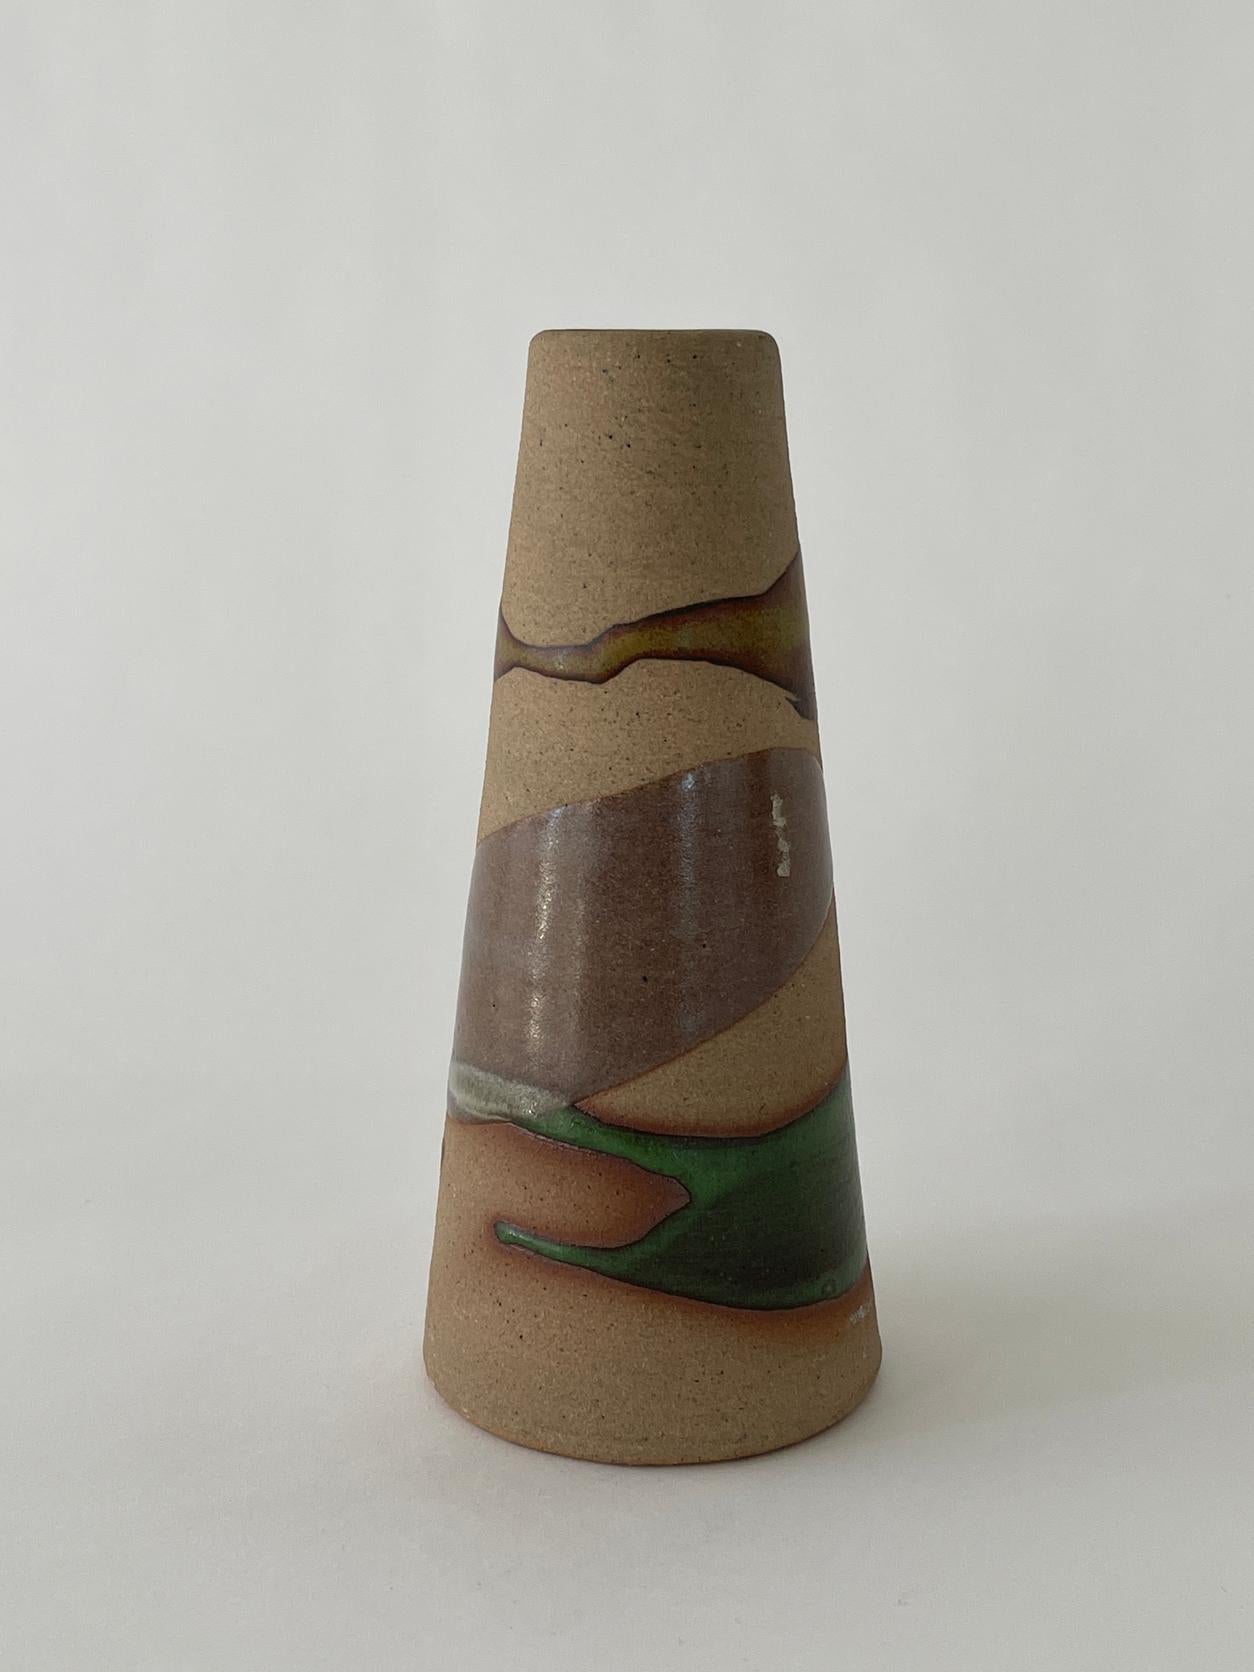 20th century textured and glazed vessel with a unique painted and glazed design. Heavy construction with a rough textured and smooth glazed ceramic exterior.